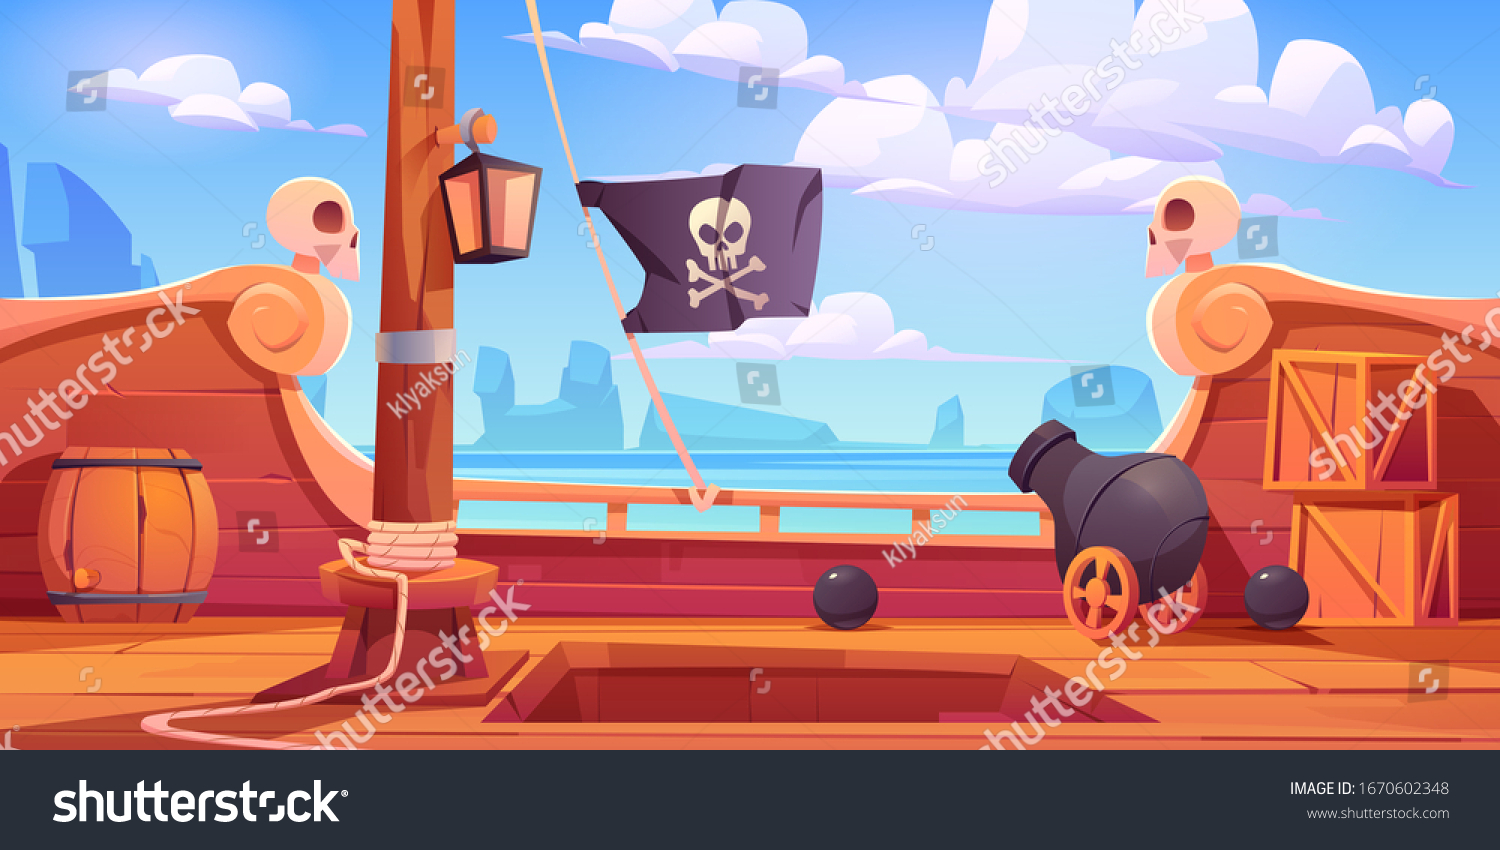 Pirate ship wooden deck onboard view, boat with cannon, wood boxes and barrel, hold entrance, mast with ropes, lantern and skull buccaneer flag on rocky seascape background cartoon vector illustration #1670602348